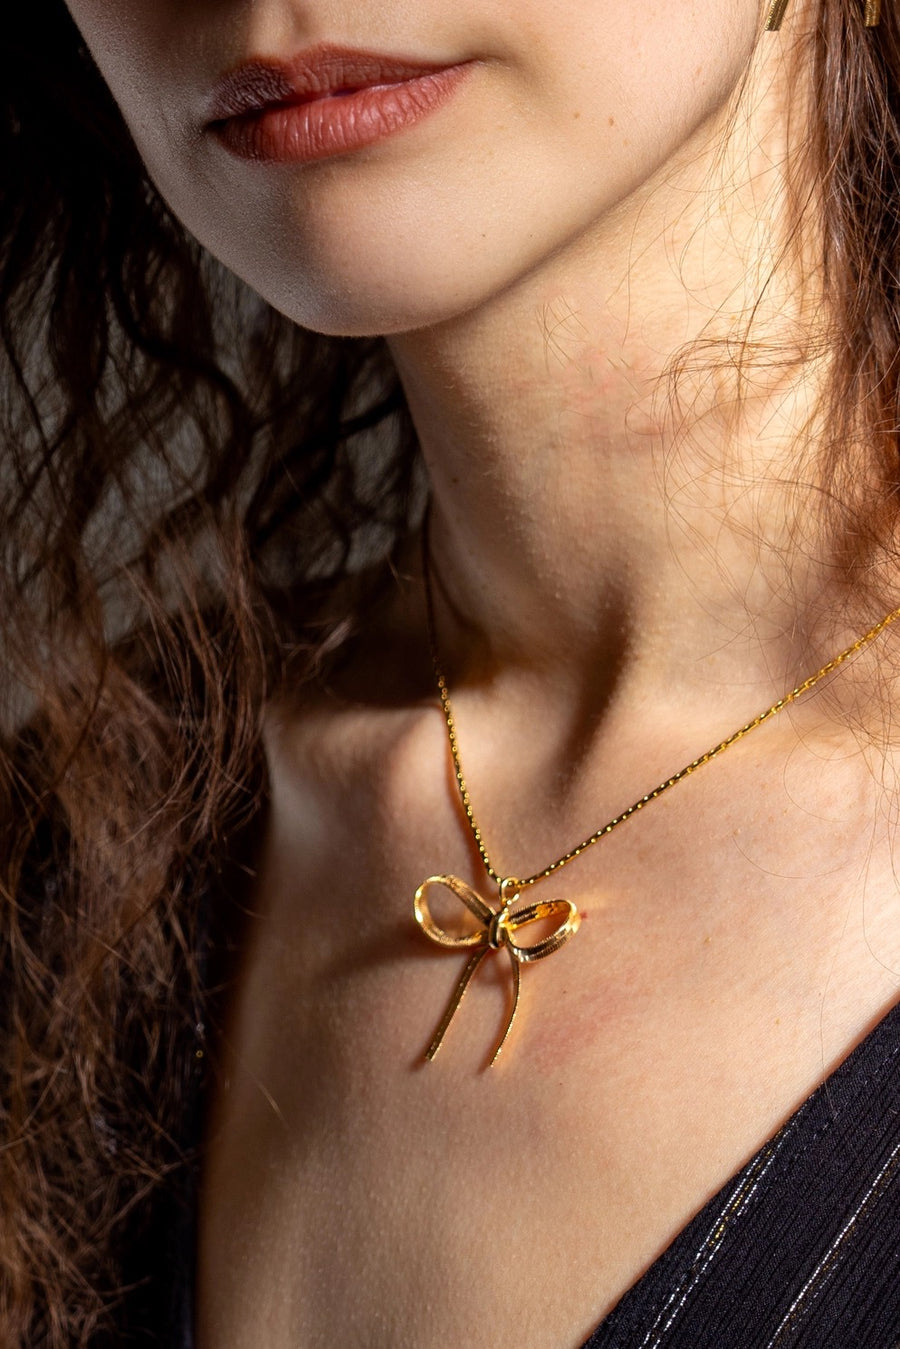 The Bow is Mine Necklace - Gold